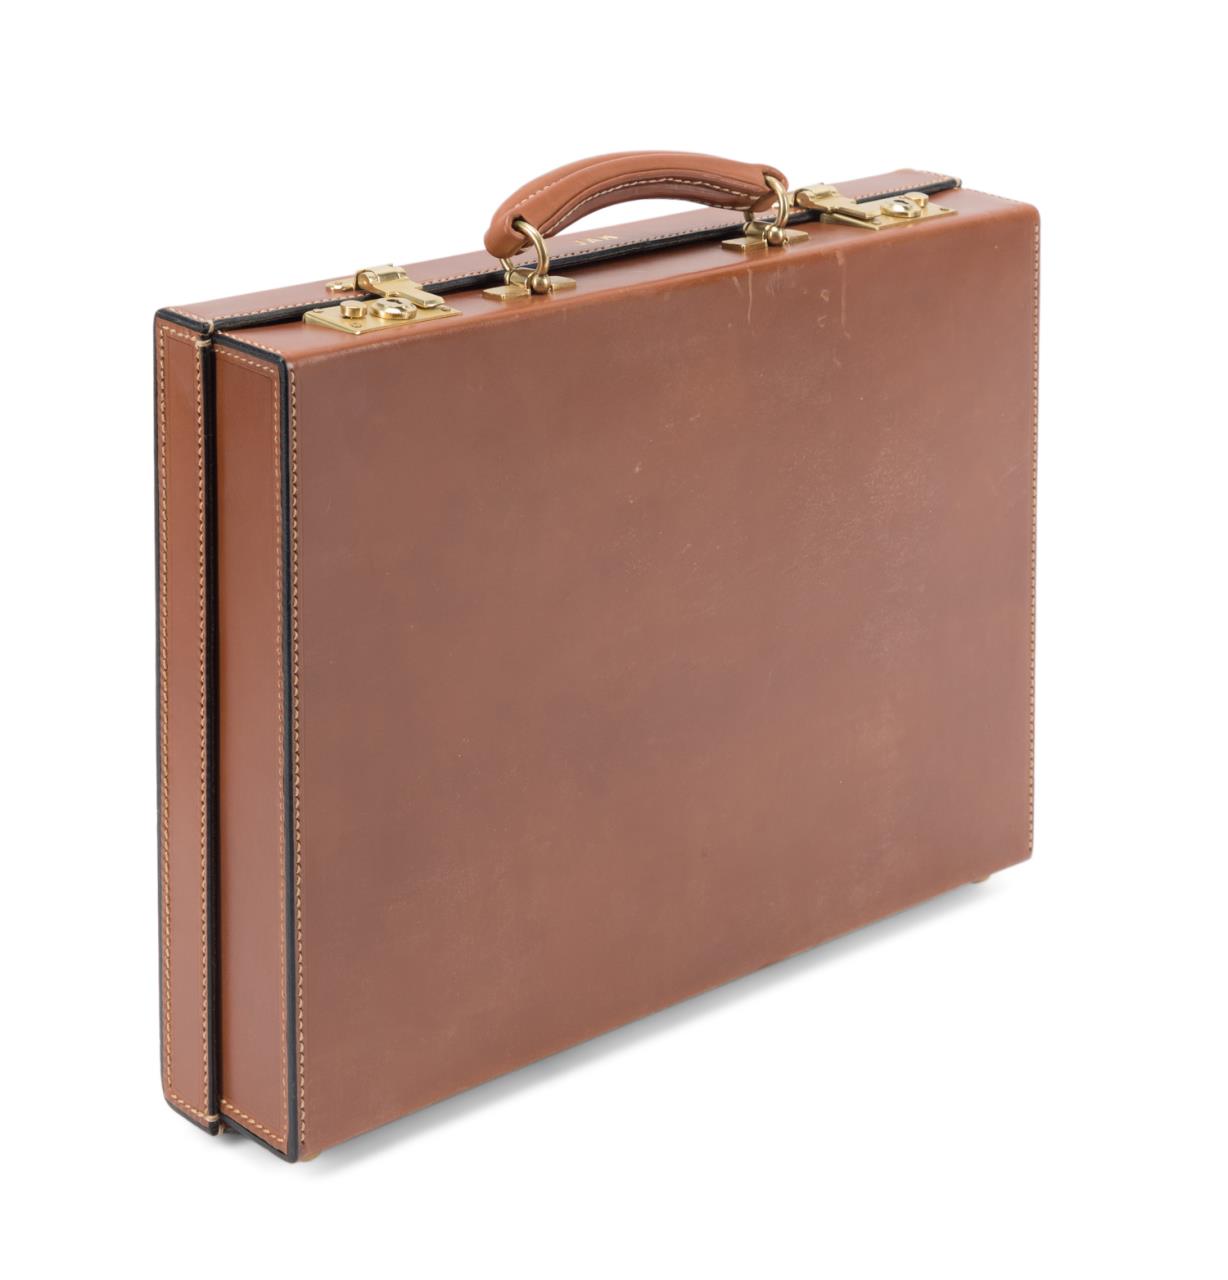 ALFRED DUNHILL COGNAC LEATHER HARDSIDE